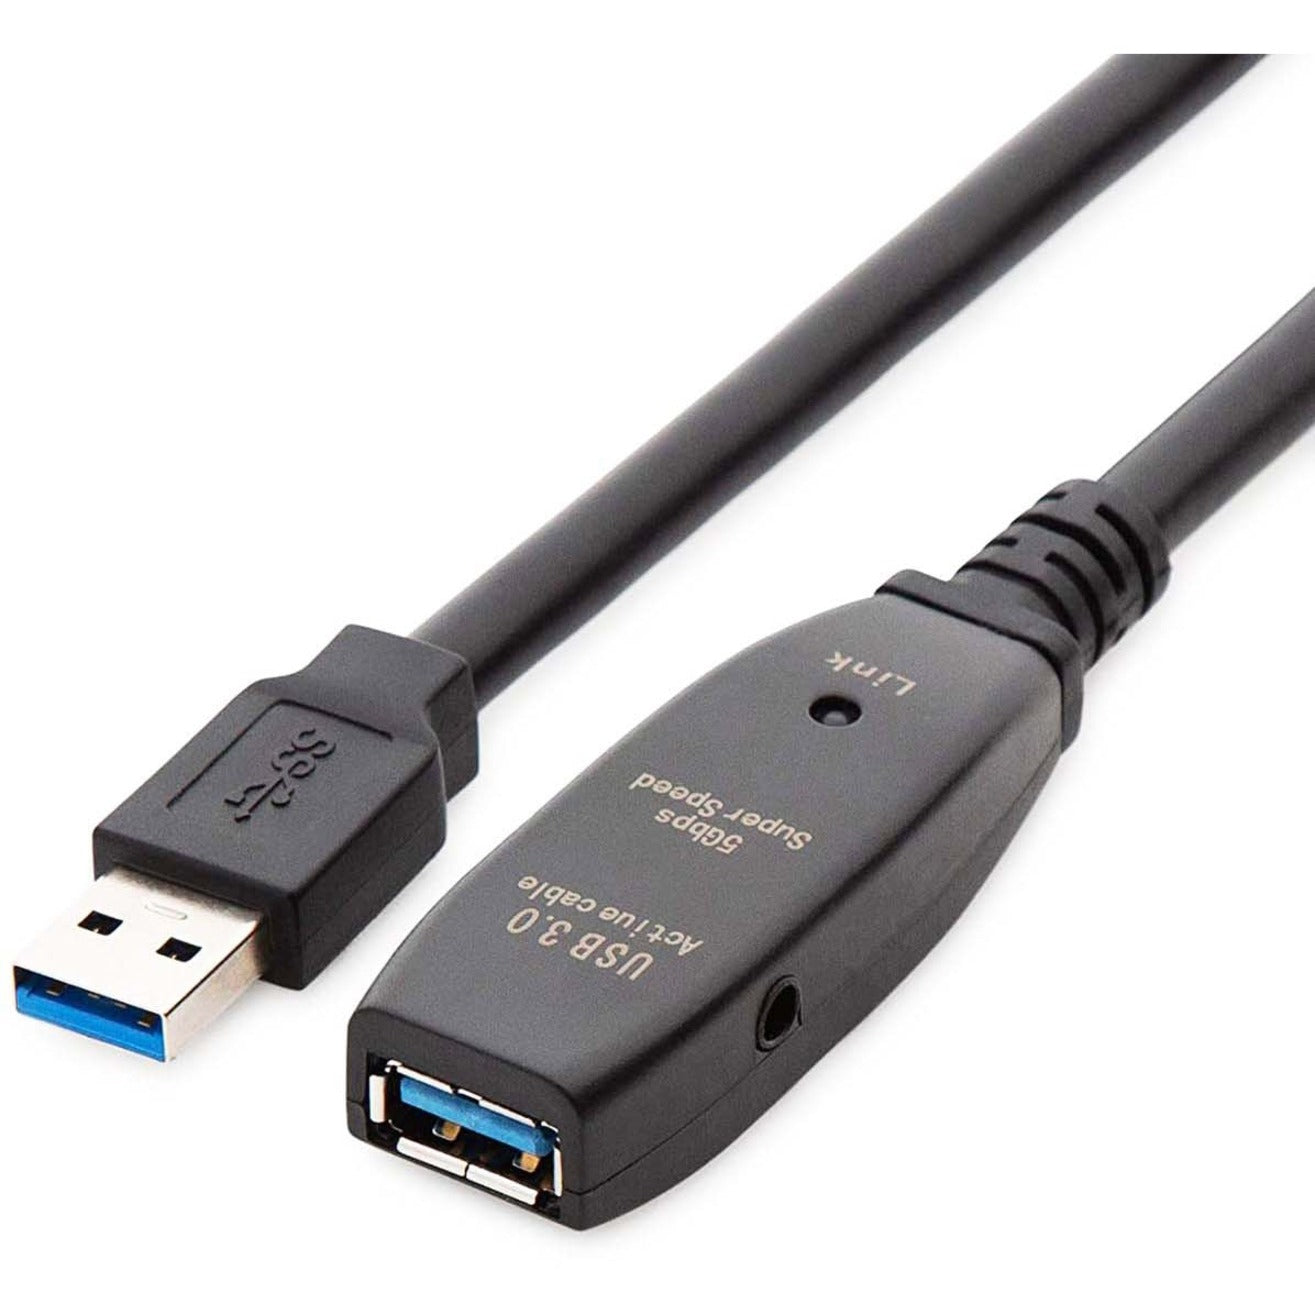 4XEM 4X3302A230M 30M Active USB 3.0 DC Power Input Extension Cable, Plug & Play, Signal Booster